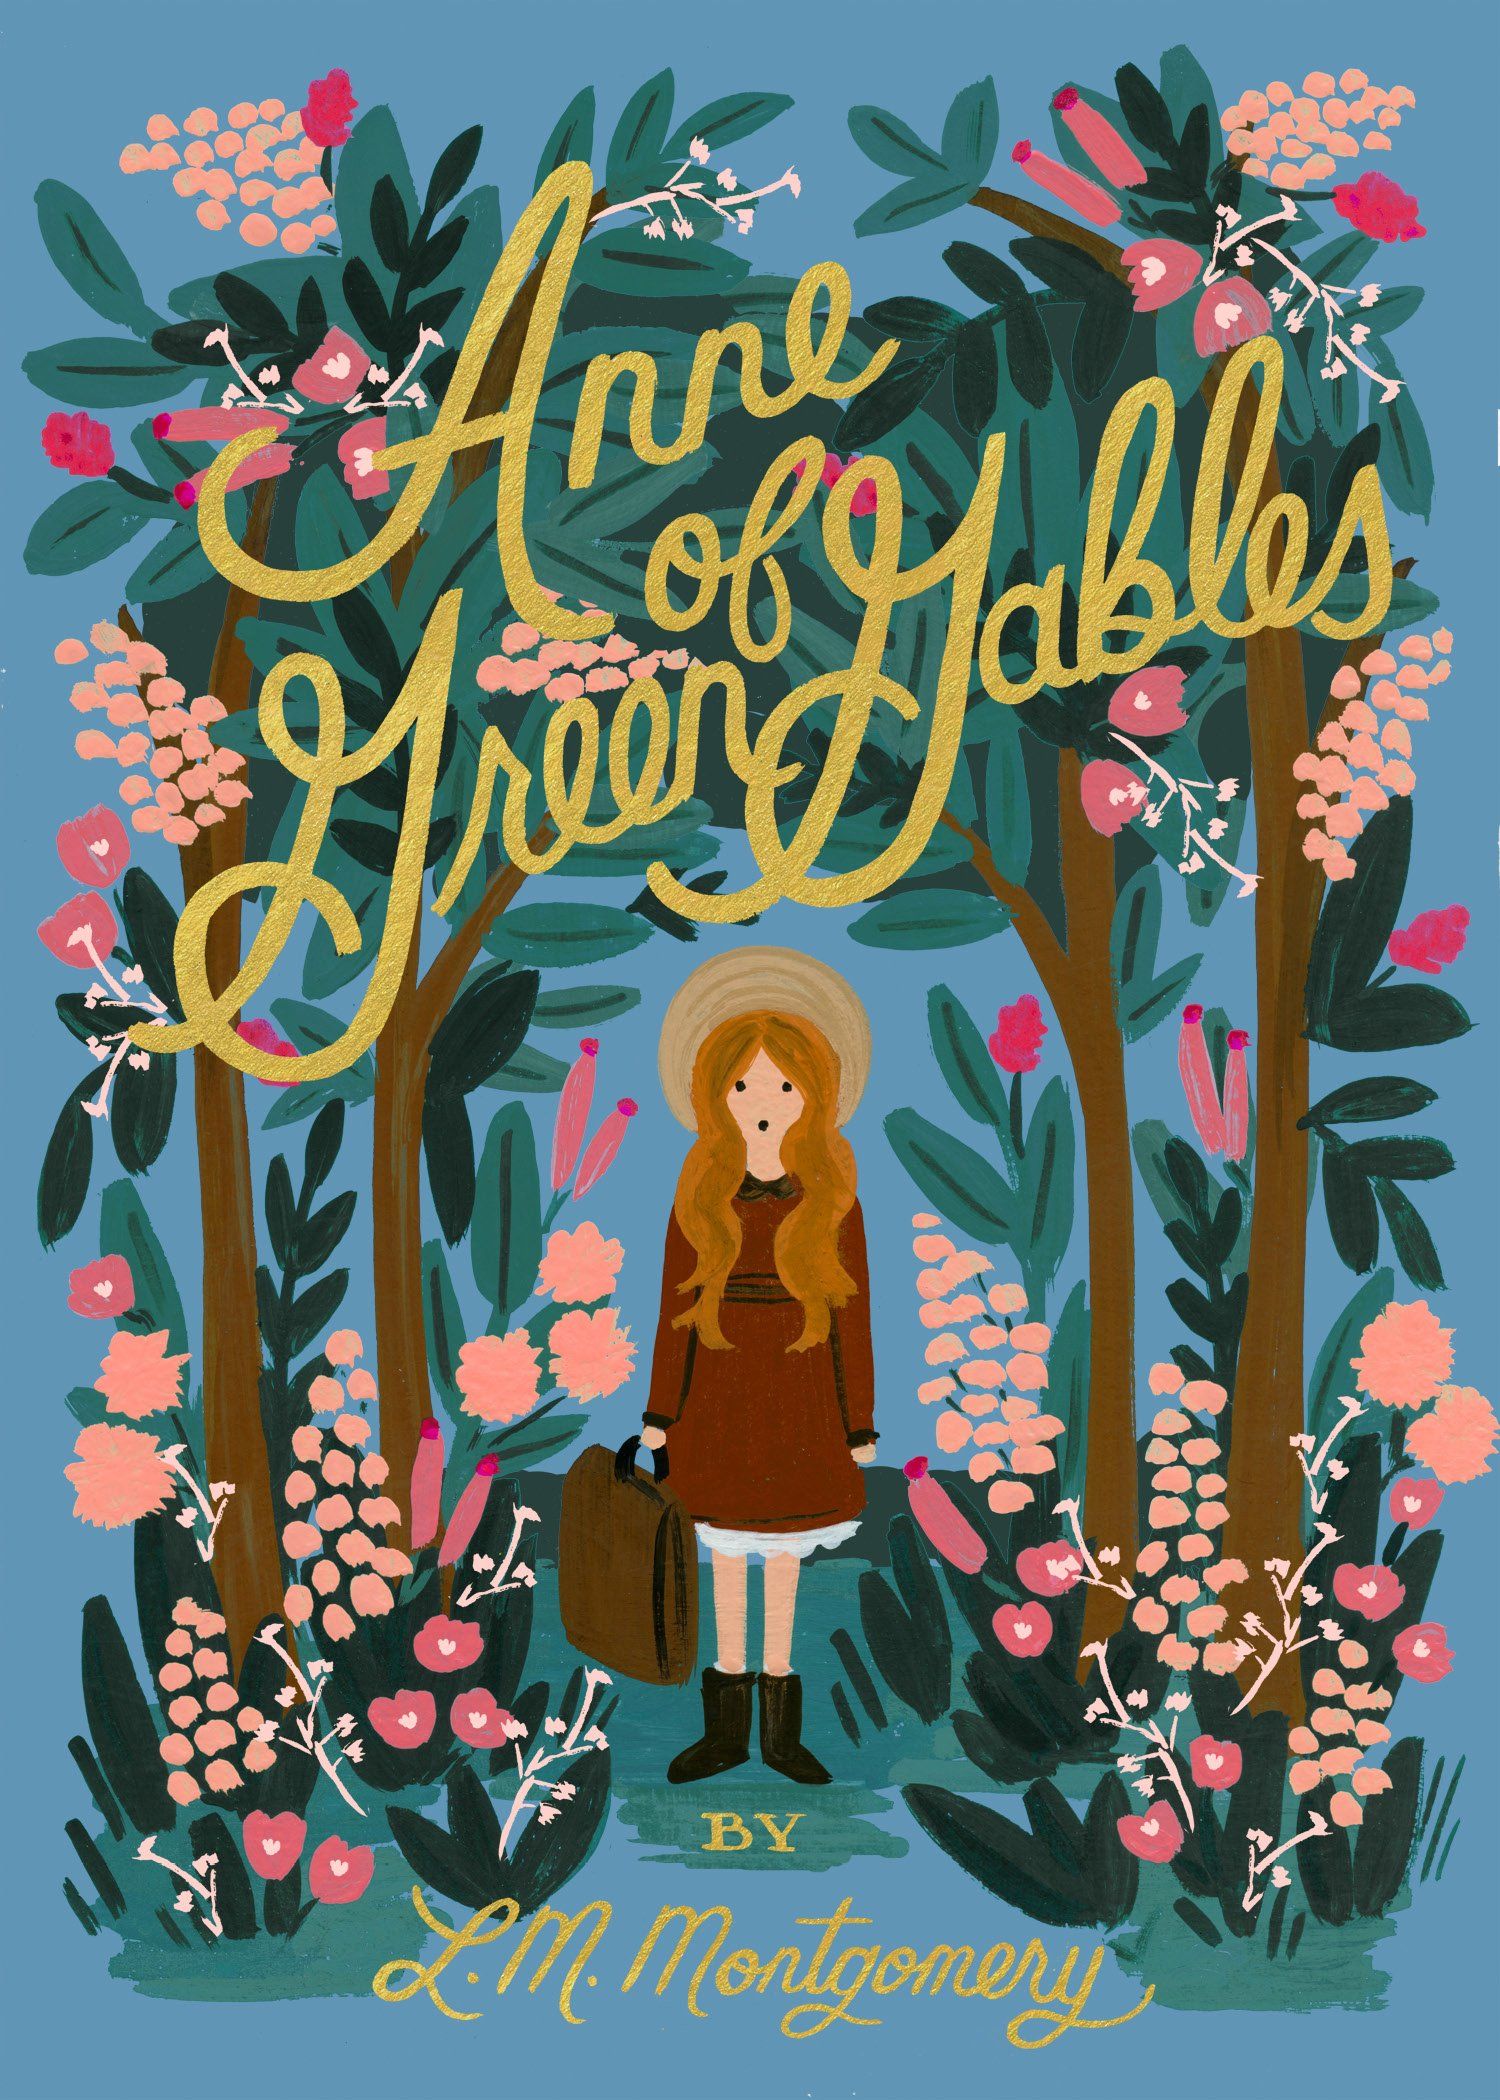 A copy of Anne of Green Gables